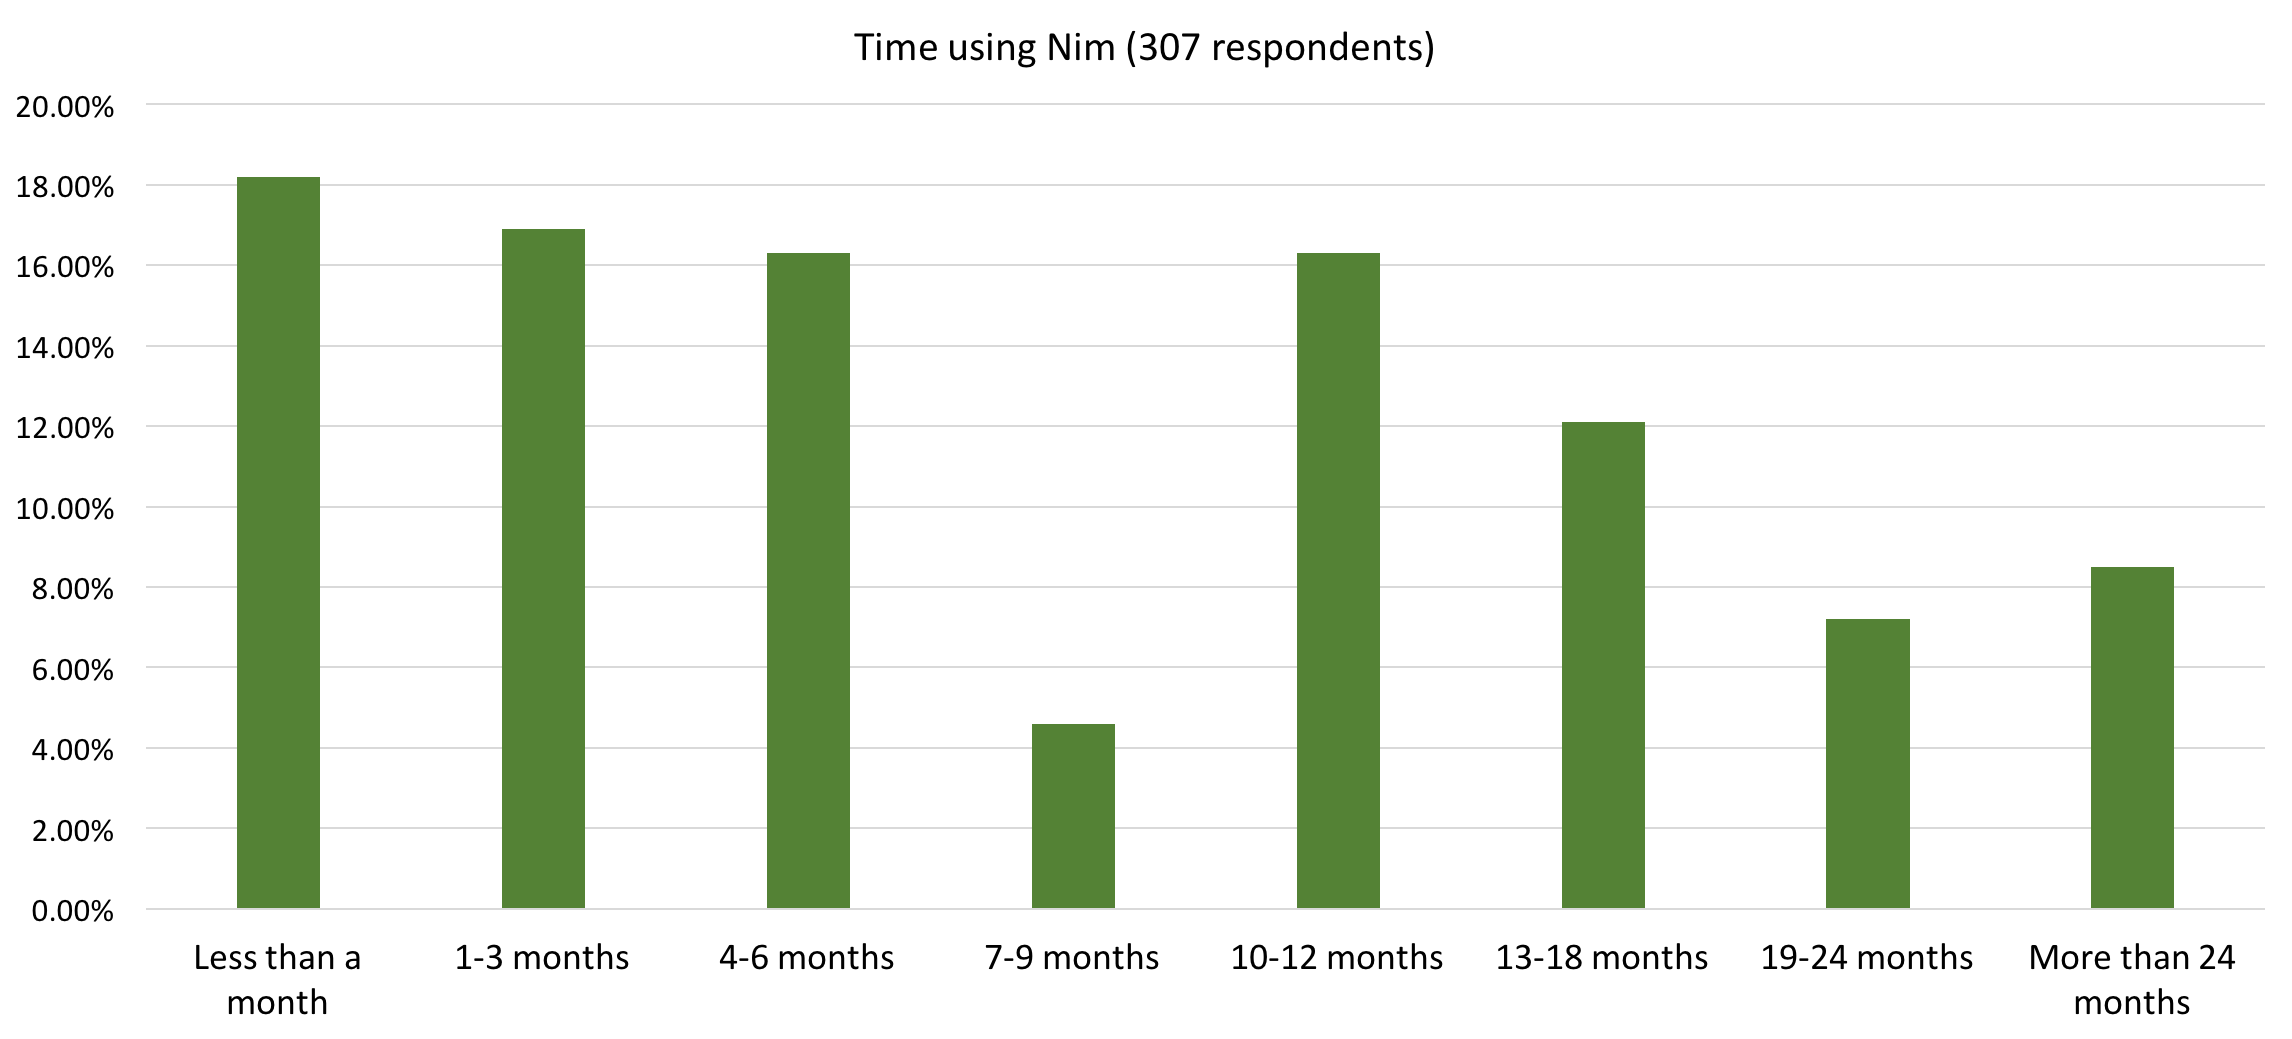 How long have you been using Nim?